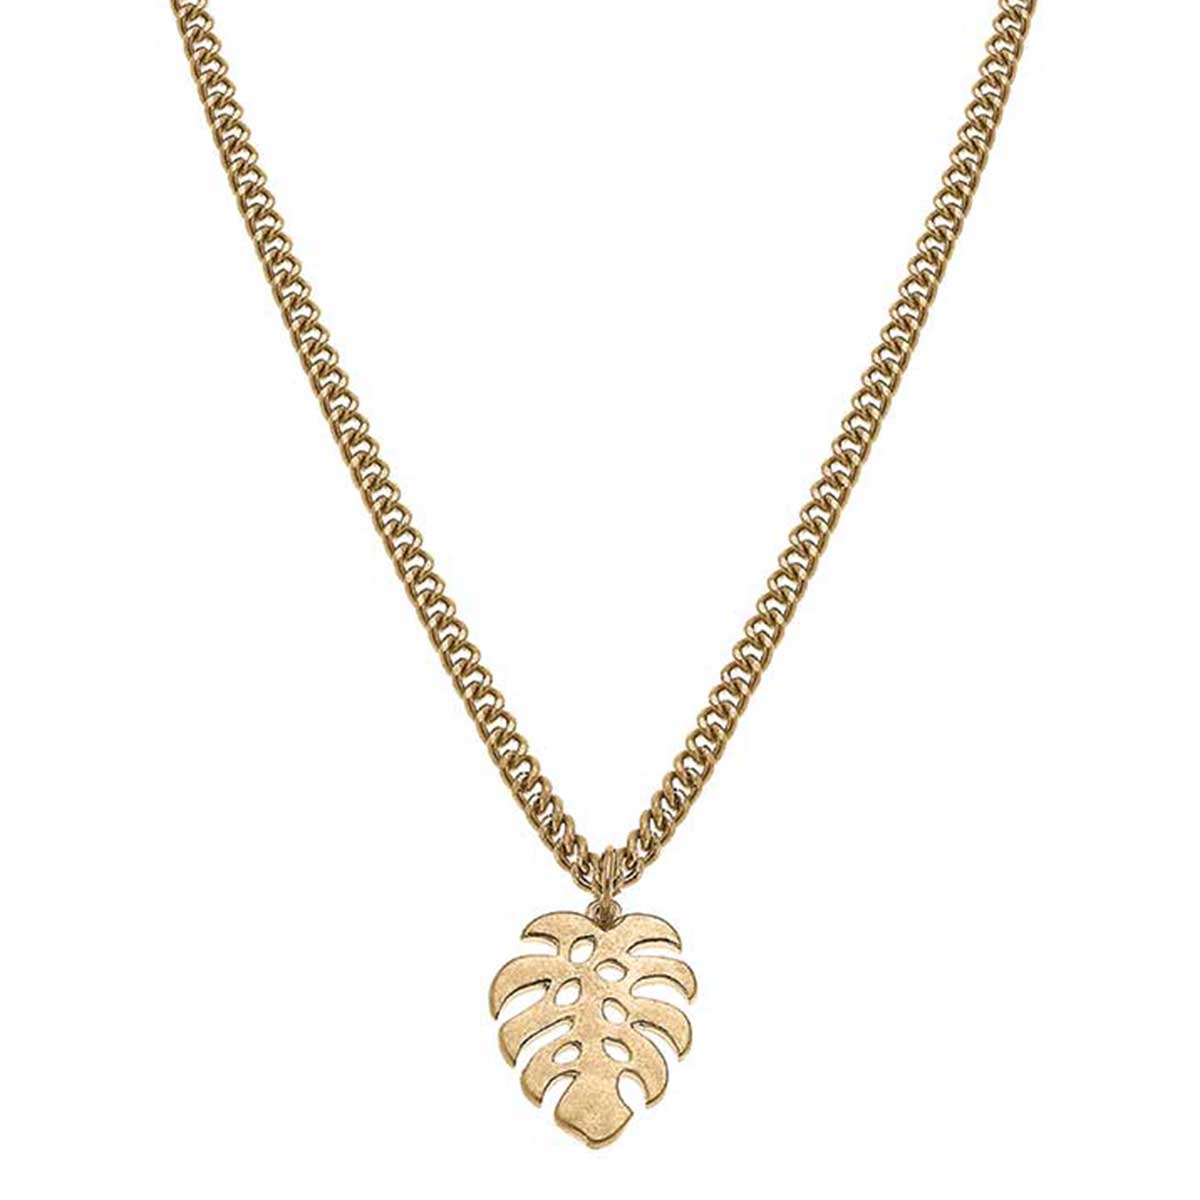 Monstera Leaf Charm Necklace in Worn Gold